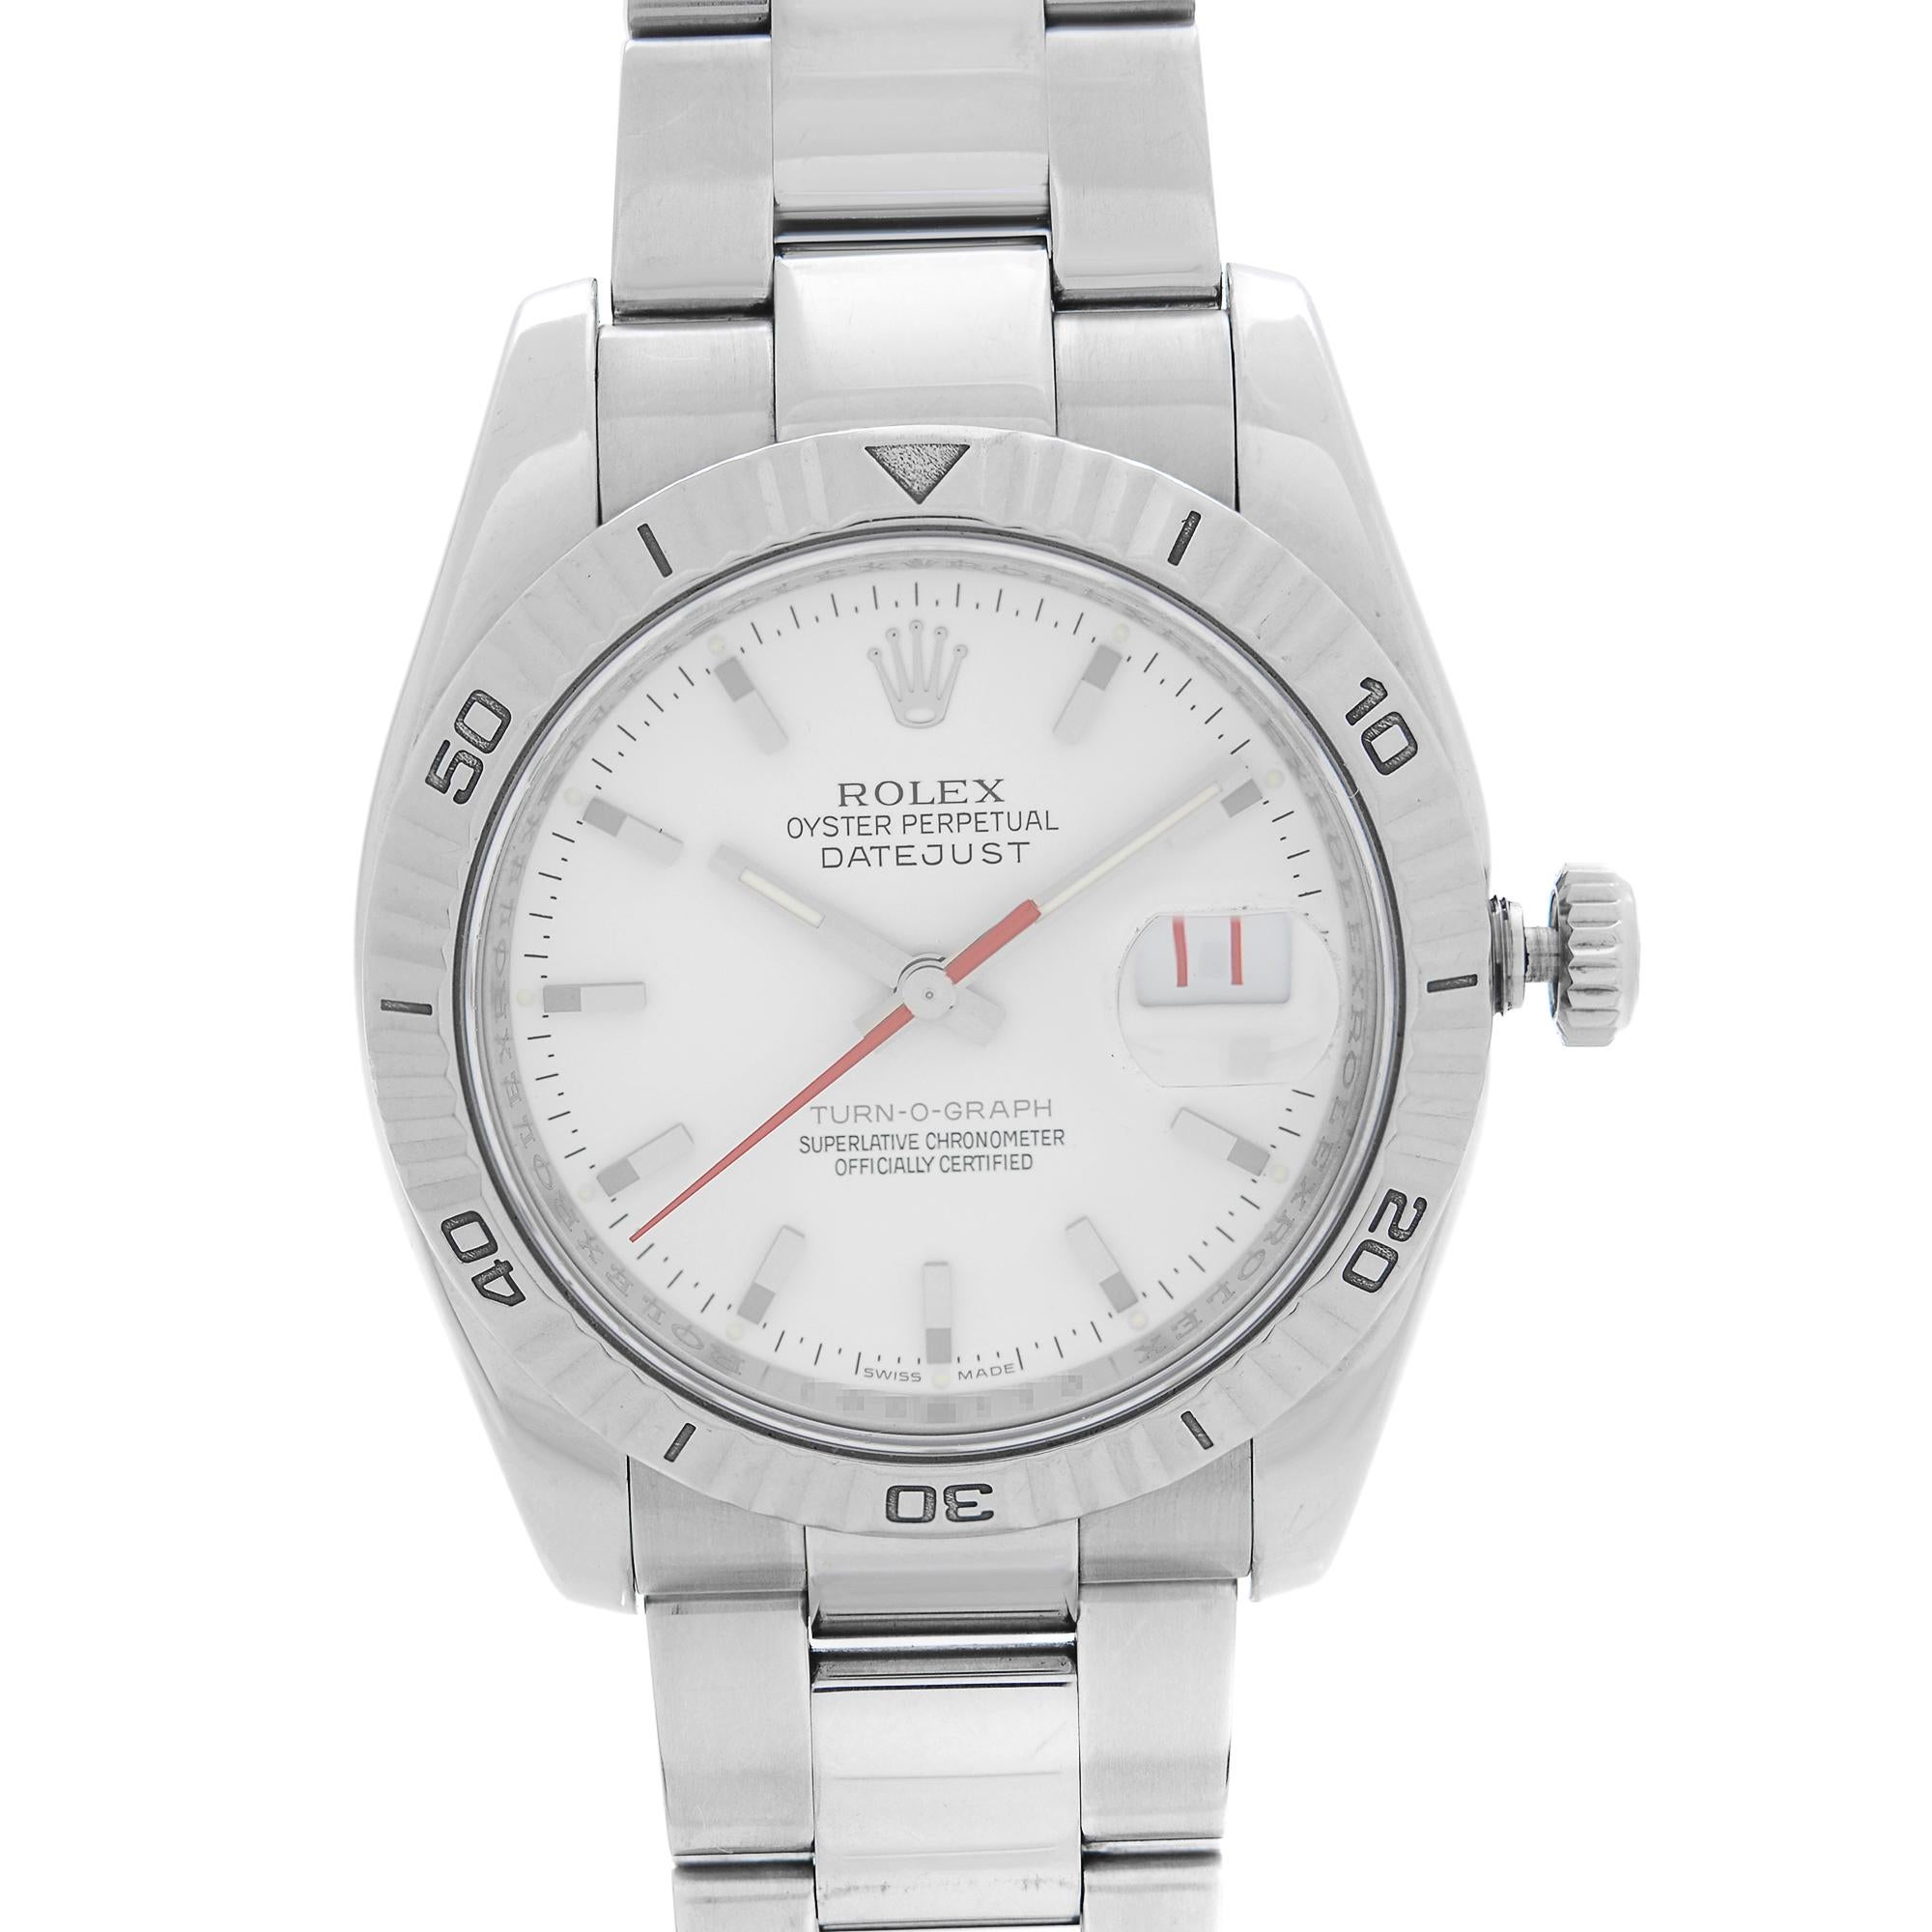 Pre-Owned Rolex Datejust 36mm Turn-O-Graph 18k White Gold Steel White Dial Automatic Men Watch 116264. The Watch was produced in 2006 and powered by an Automatic Movement and Features: Polished Stainless Steel Round Case and Bracelet. Bidirectional